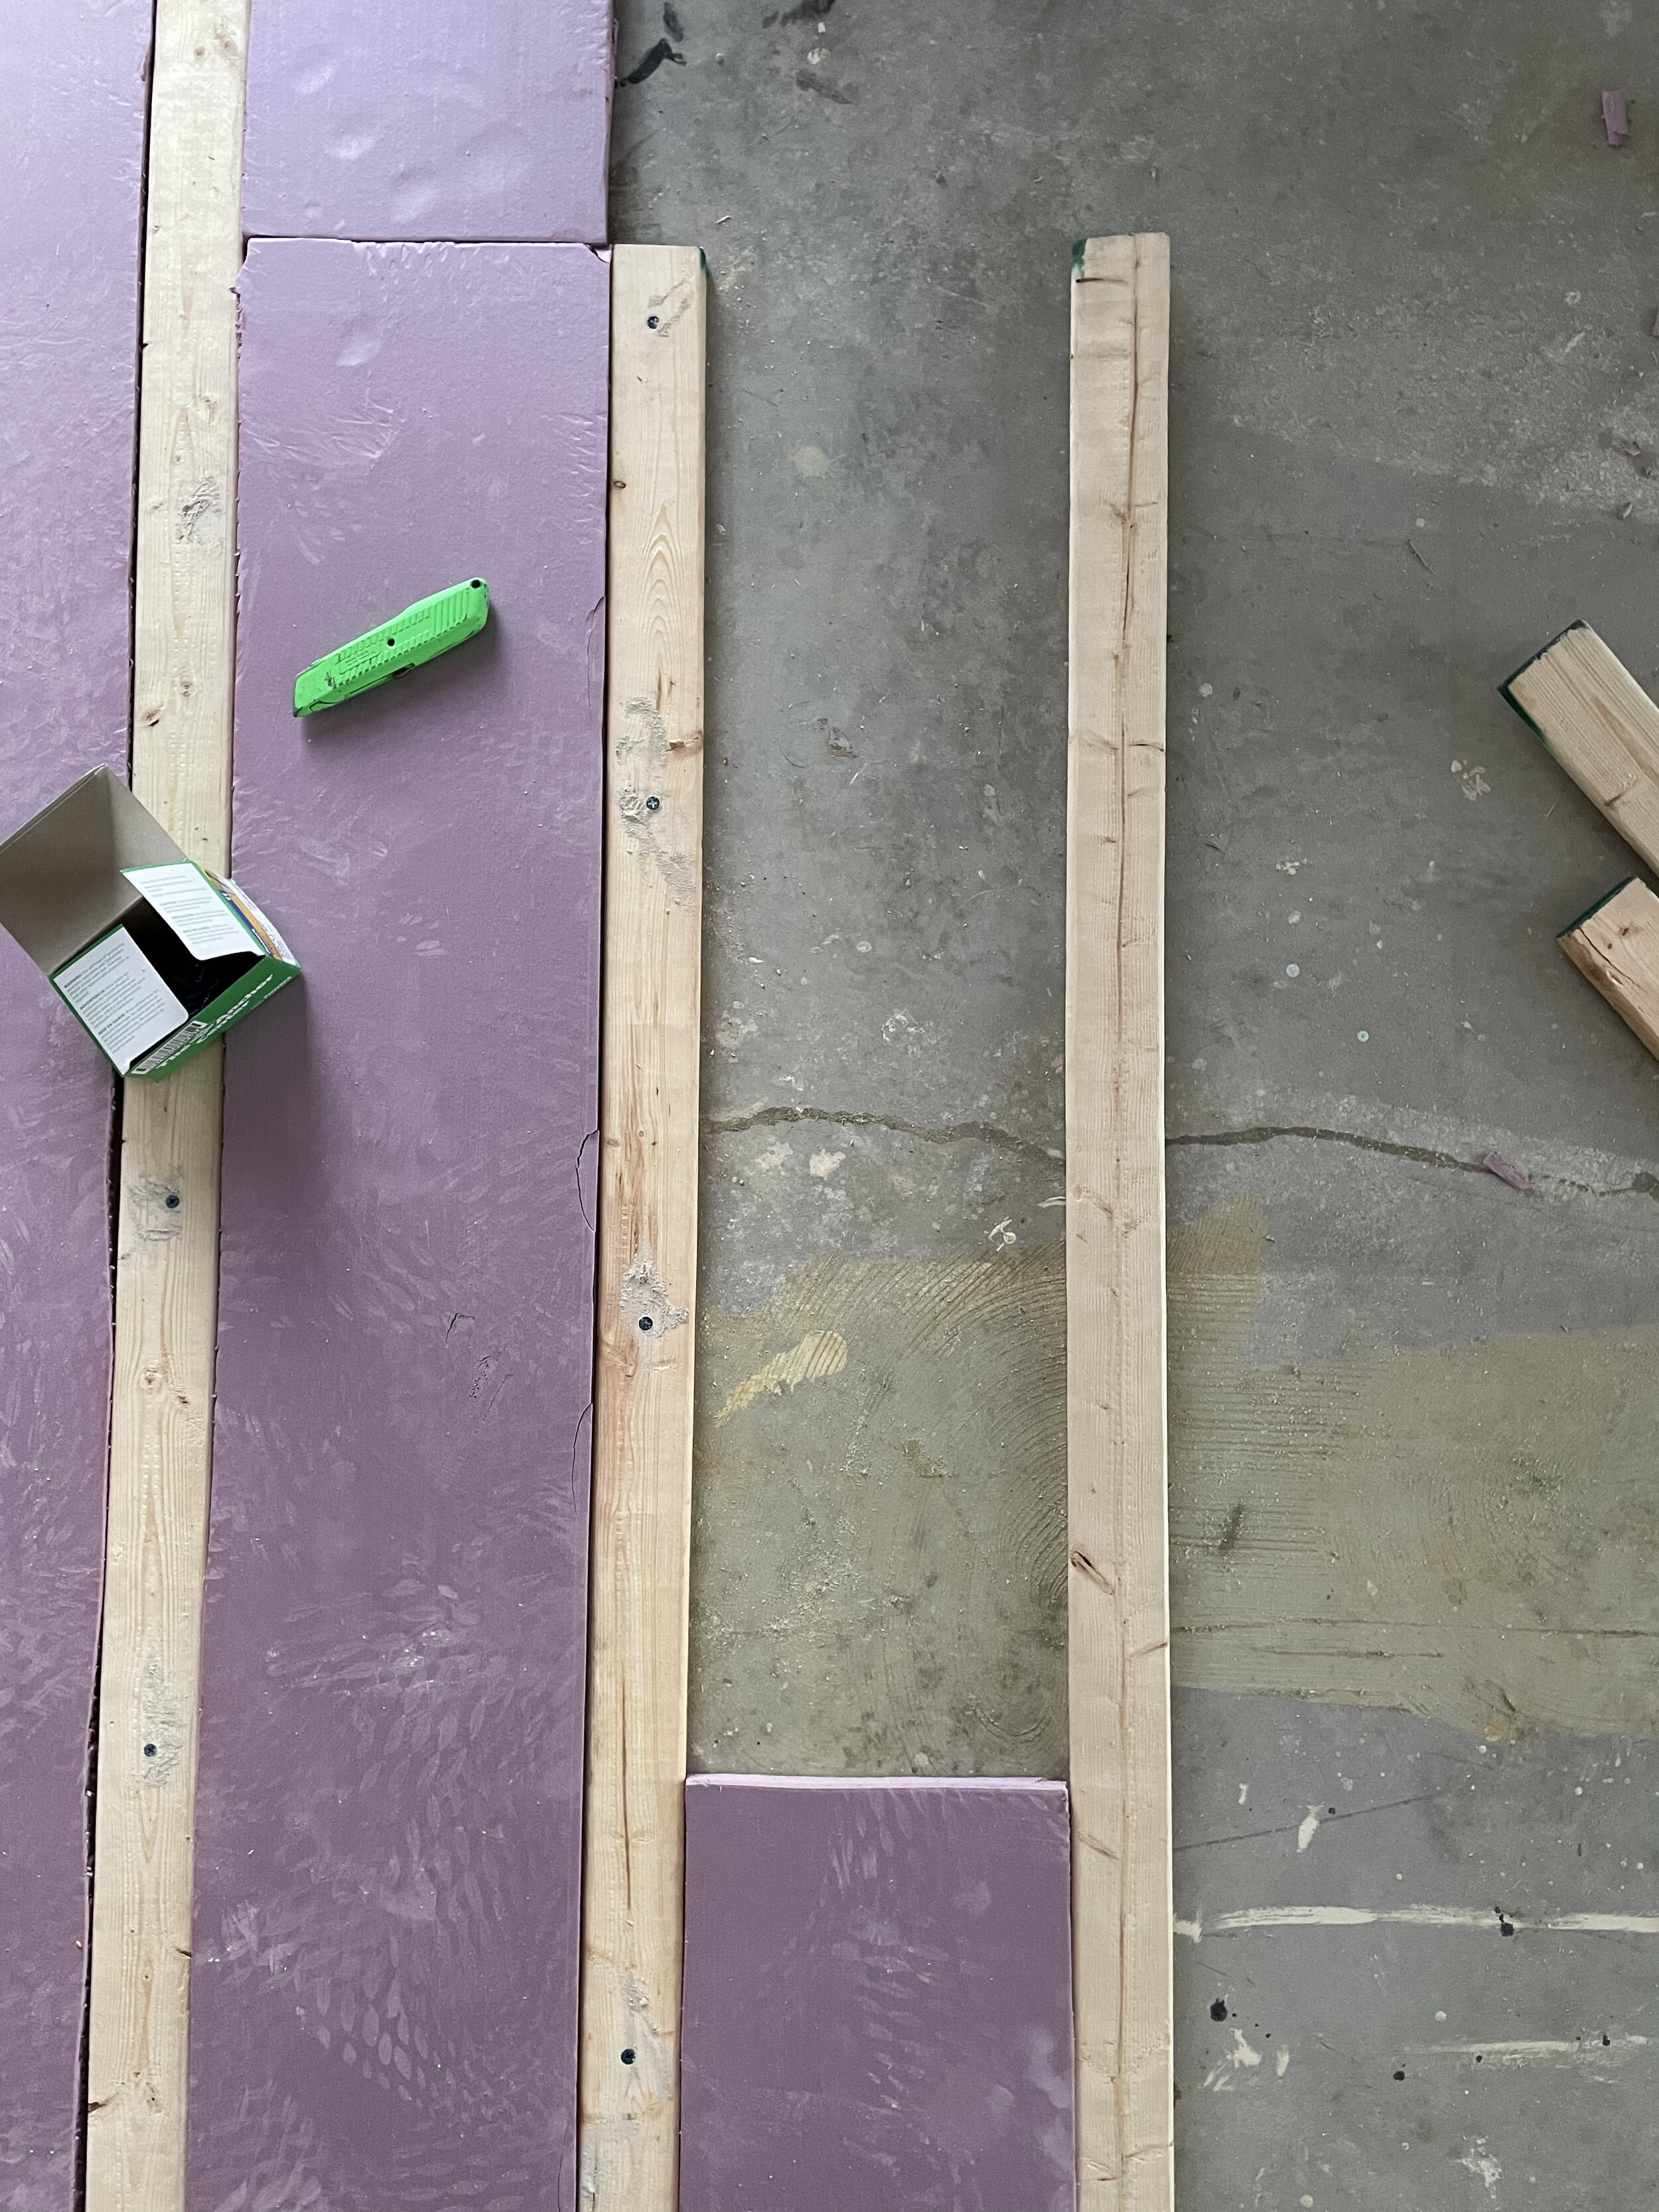 In order to install hardwood over the concrete slab in the guest, our installers built a ‘sleeper system’ with wood boards and insulation